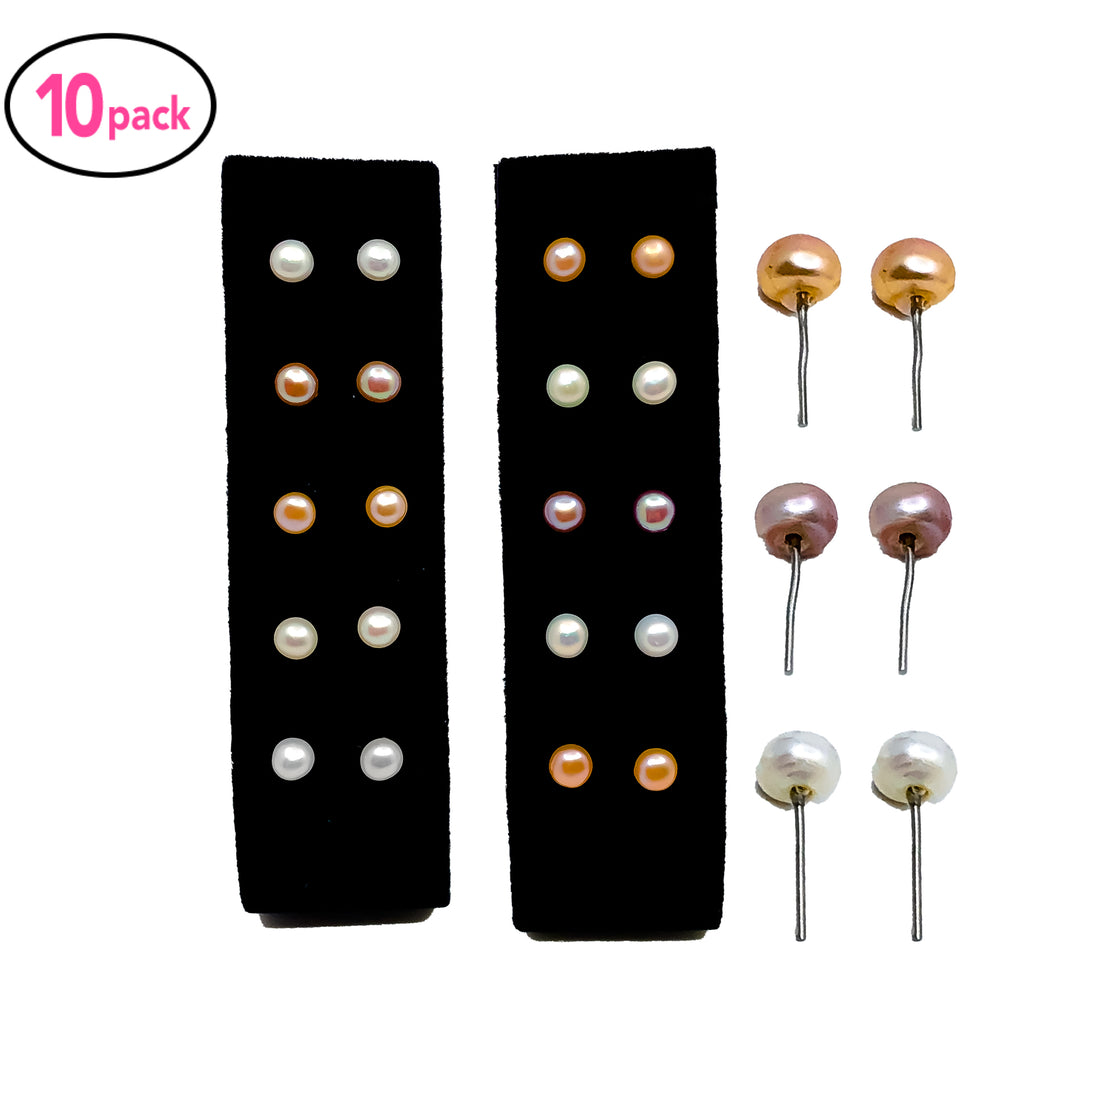 Button Flat Bottom Pearl Earrings 10 Pack Natural Colors 6-7mm Silver Plated with Rhodium Coating